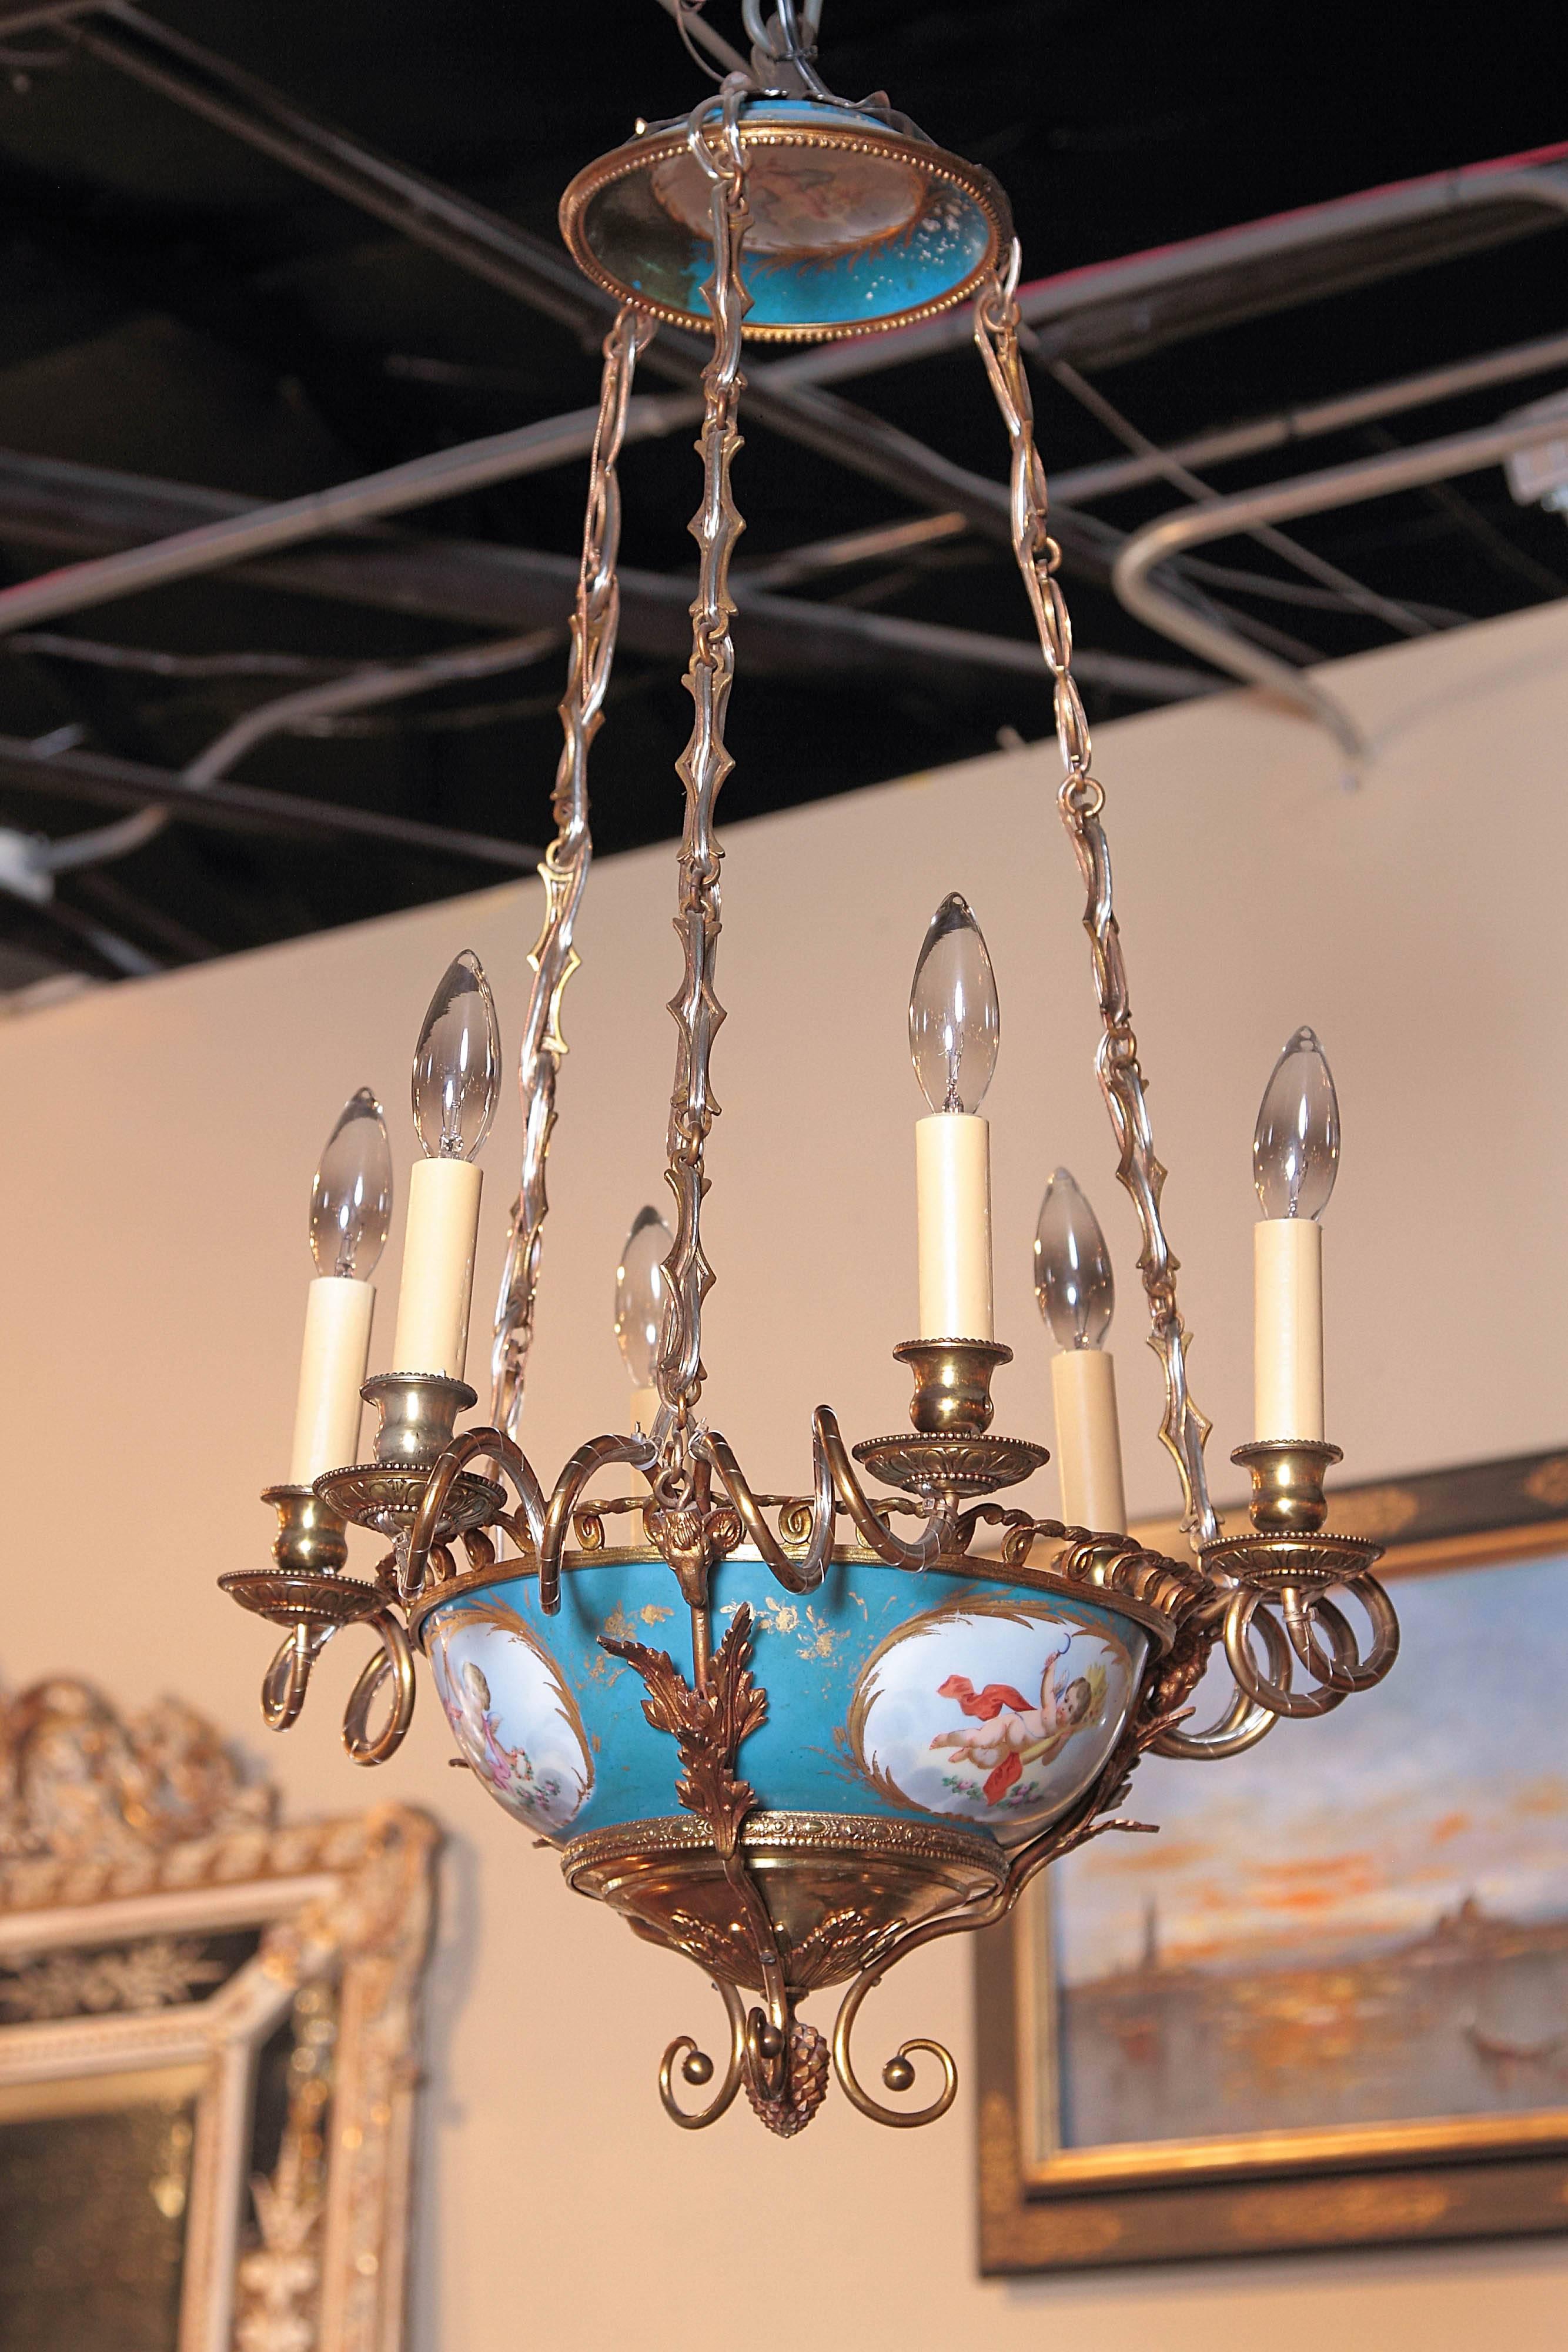 Invite Classic French elegance into your home with this antique chandelier from Sevres, France, circa 1860. The unique chandelier features a bowl-shaped porcelain base with ormolu embellishments. The chandelier has four hand painted cherub